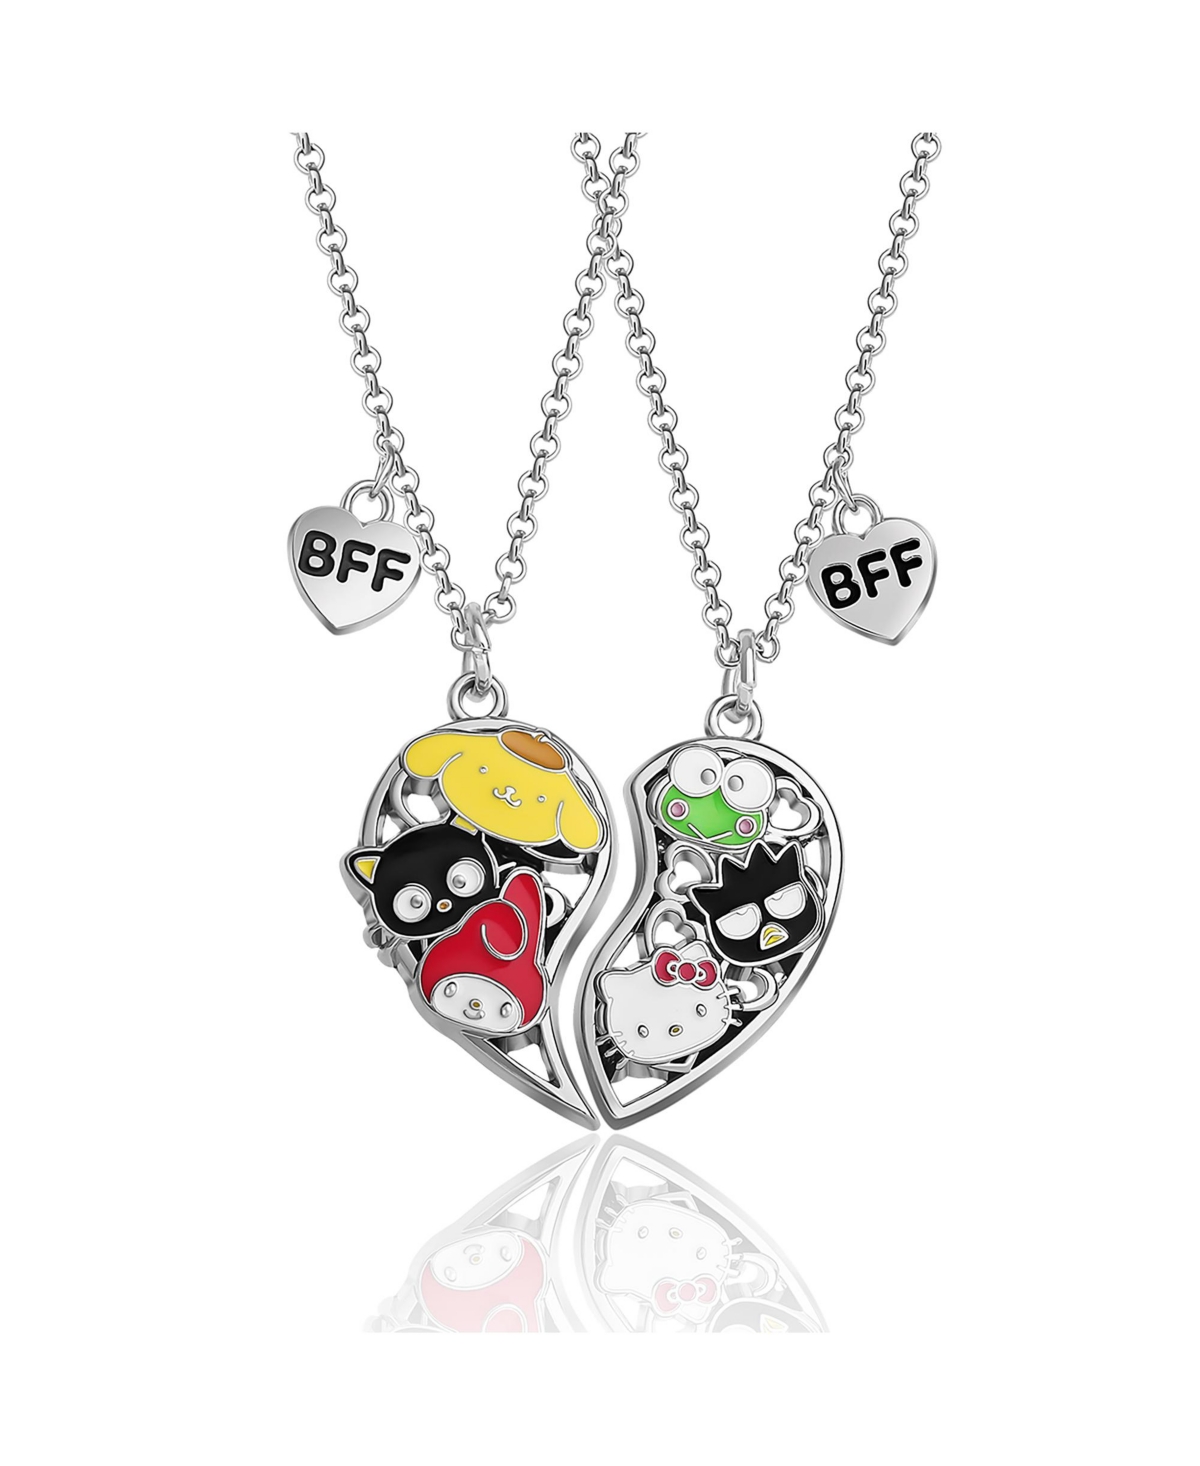 Sanrio Hello Kitty and Friends Bff Friendship Necklaces, 16 + 3'' - Set of 2, Authentic Officially Licensed - Silver tone, red, black